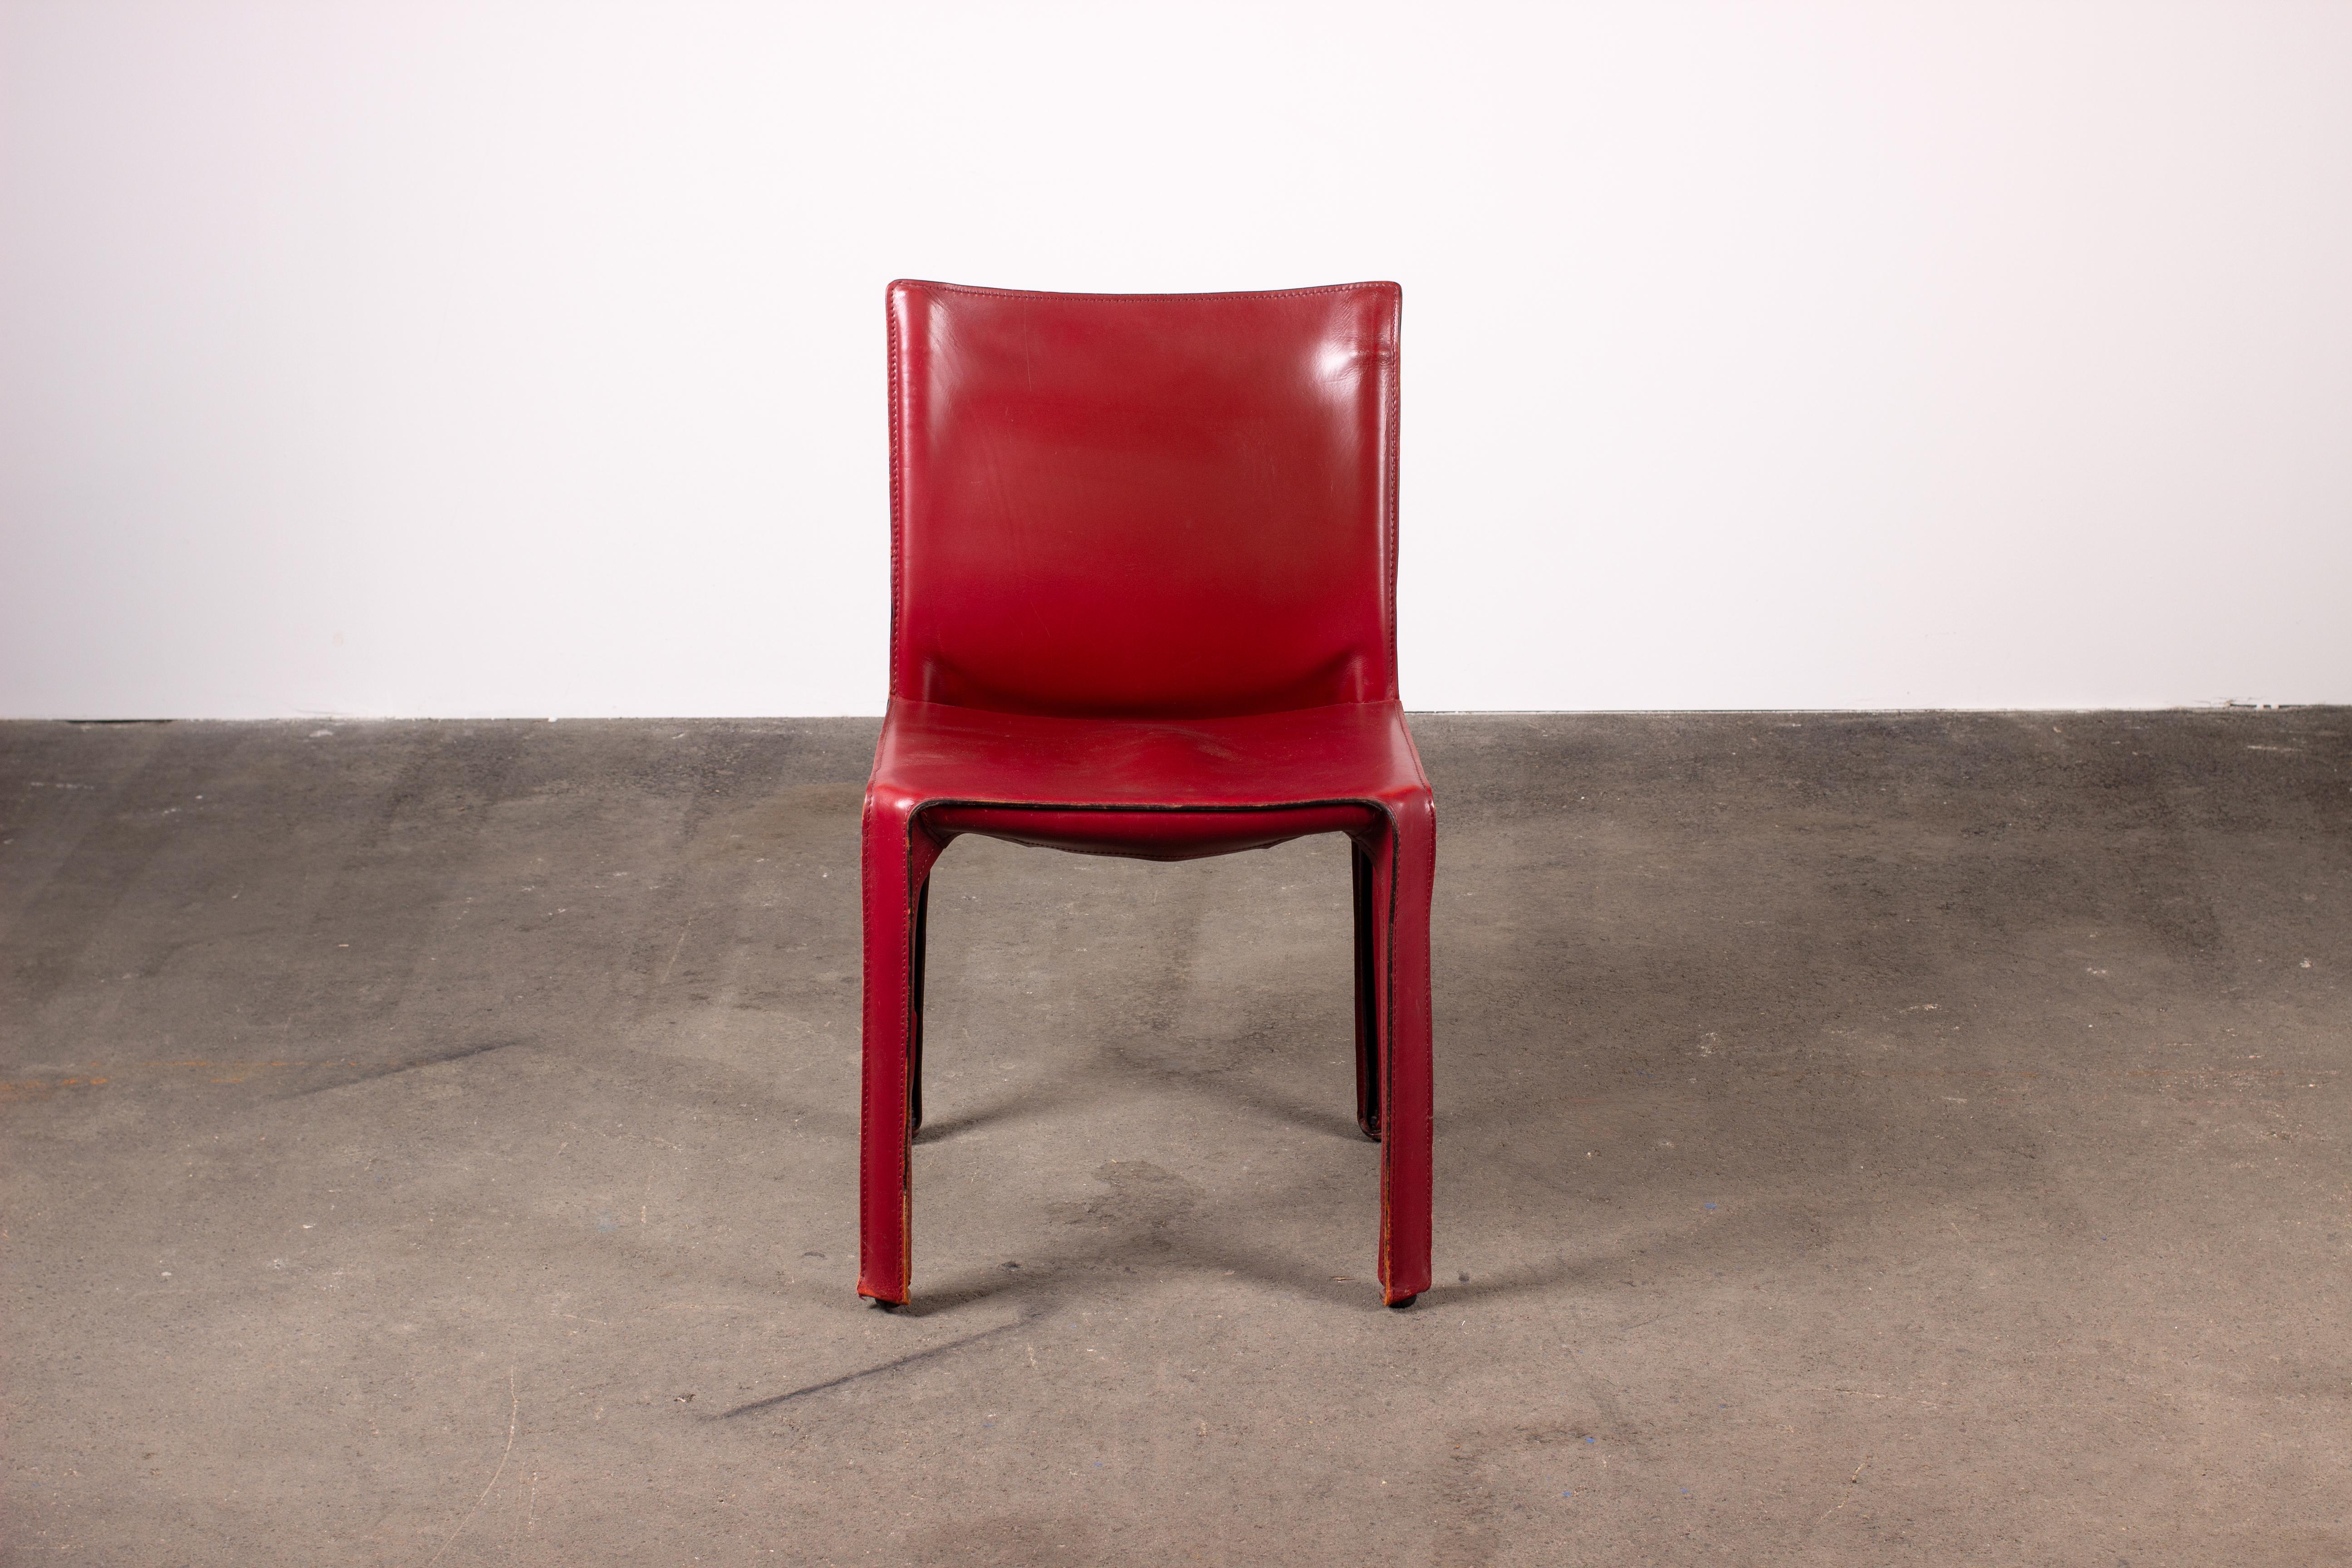 Set of two Mario Bellini CAB 412 chairs, made by Cassina in the 1970s. Flexible steel frame covered with a skin of high quality burgundy red saddle leather. This elegant, versatile chair is equally suitable for the dining room, study or living room.